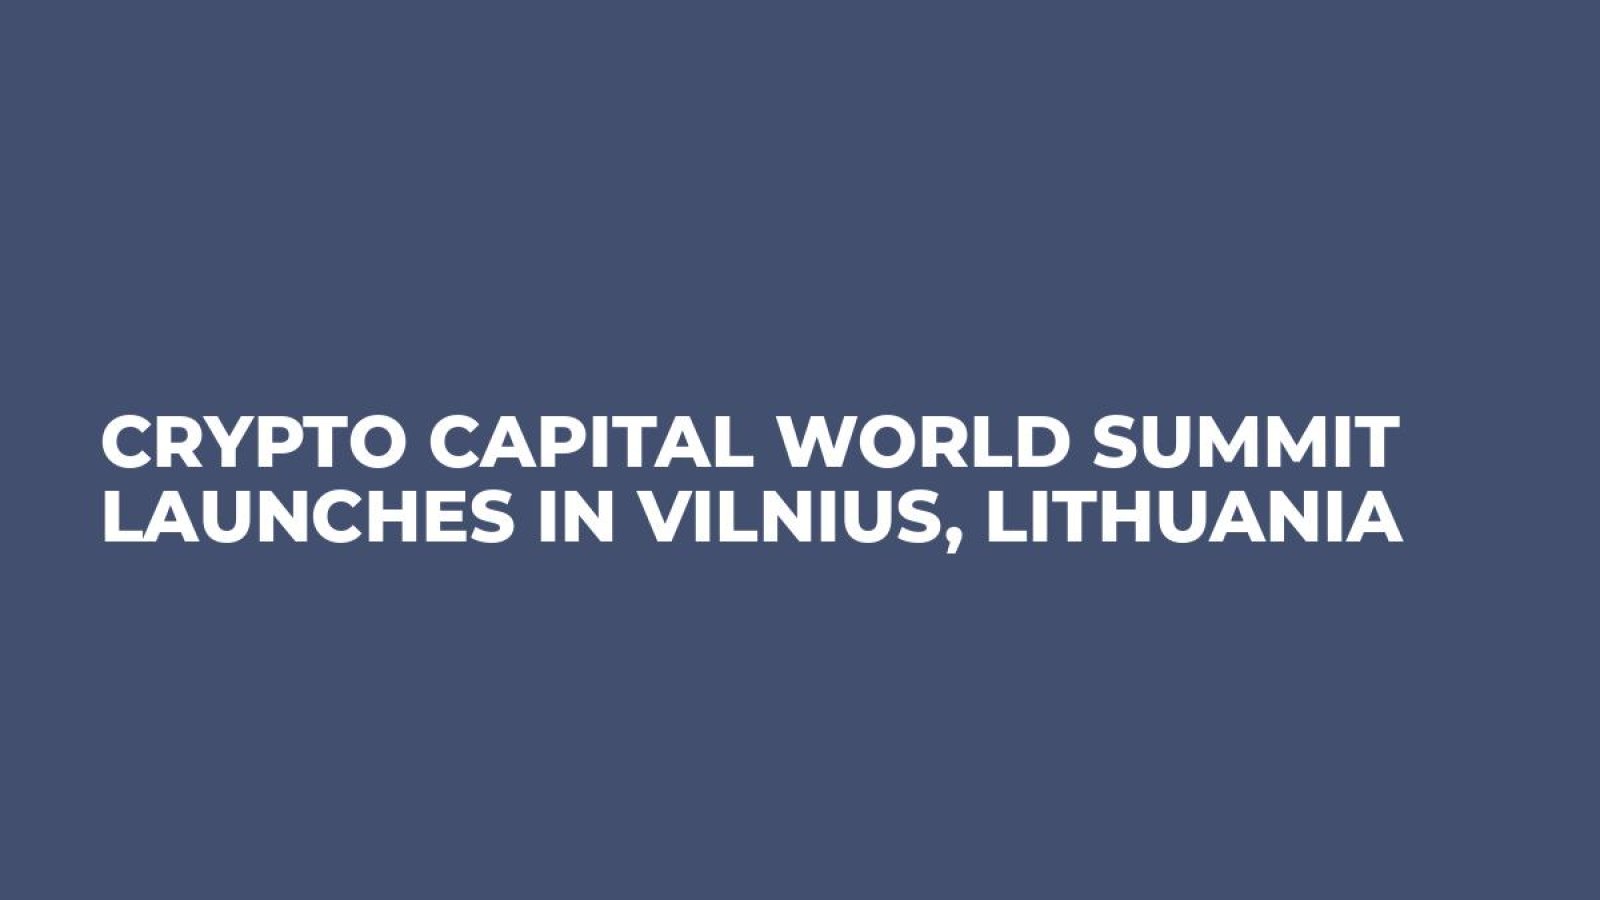 Crypto Capital World Summit launches in Vilnius, Lithuania